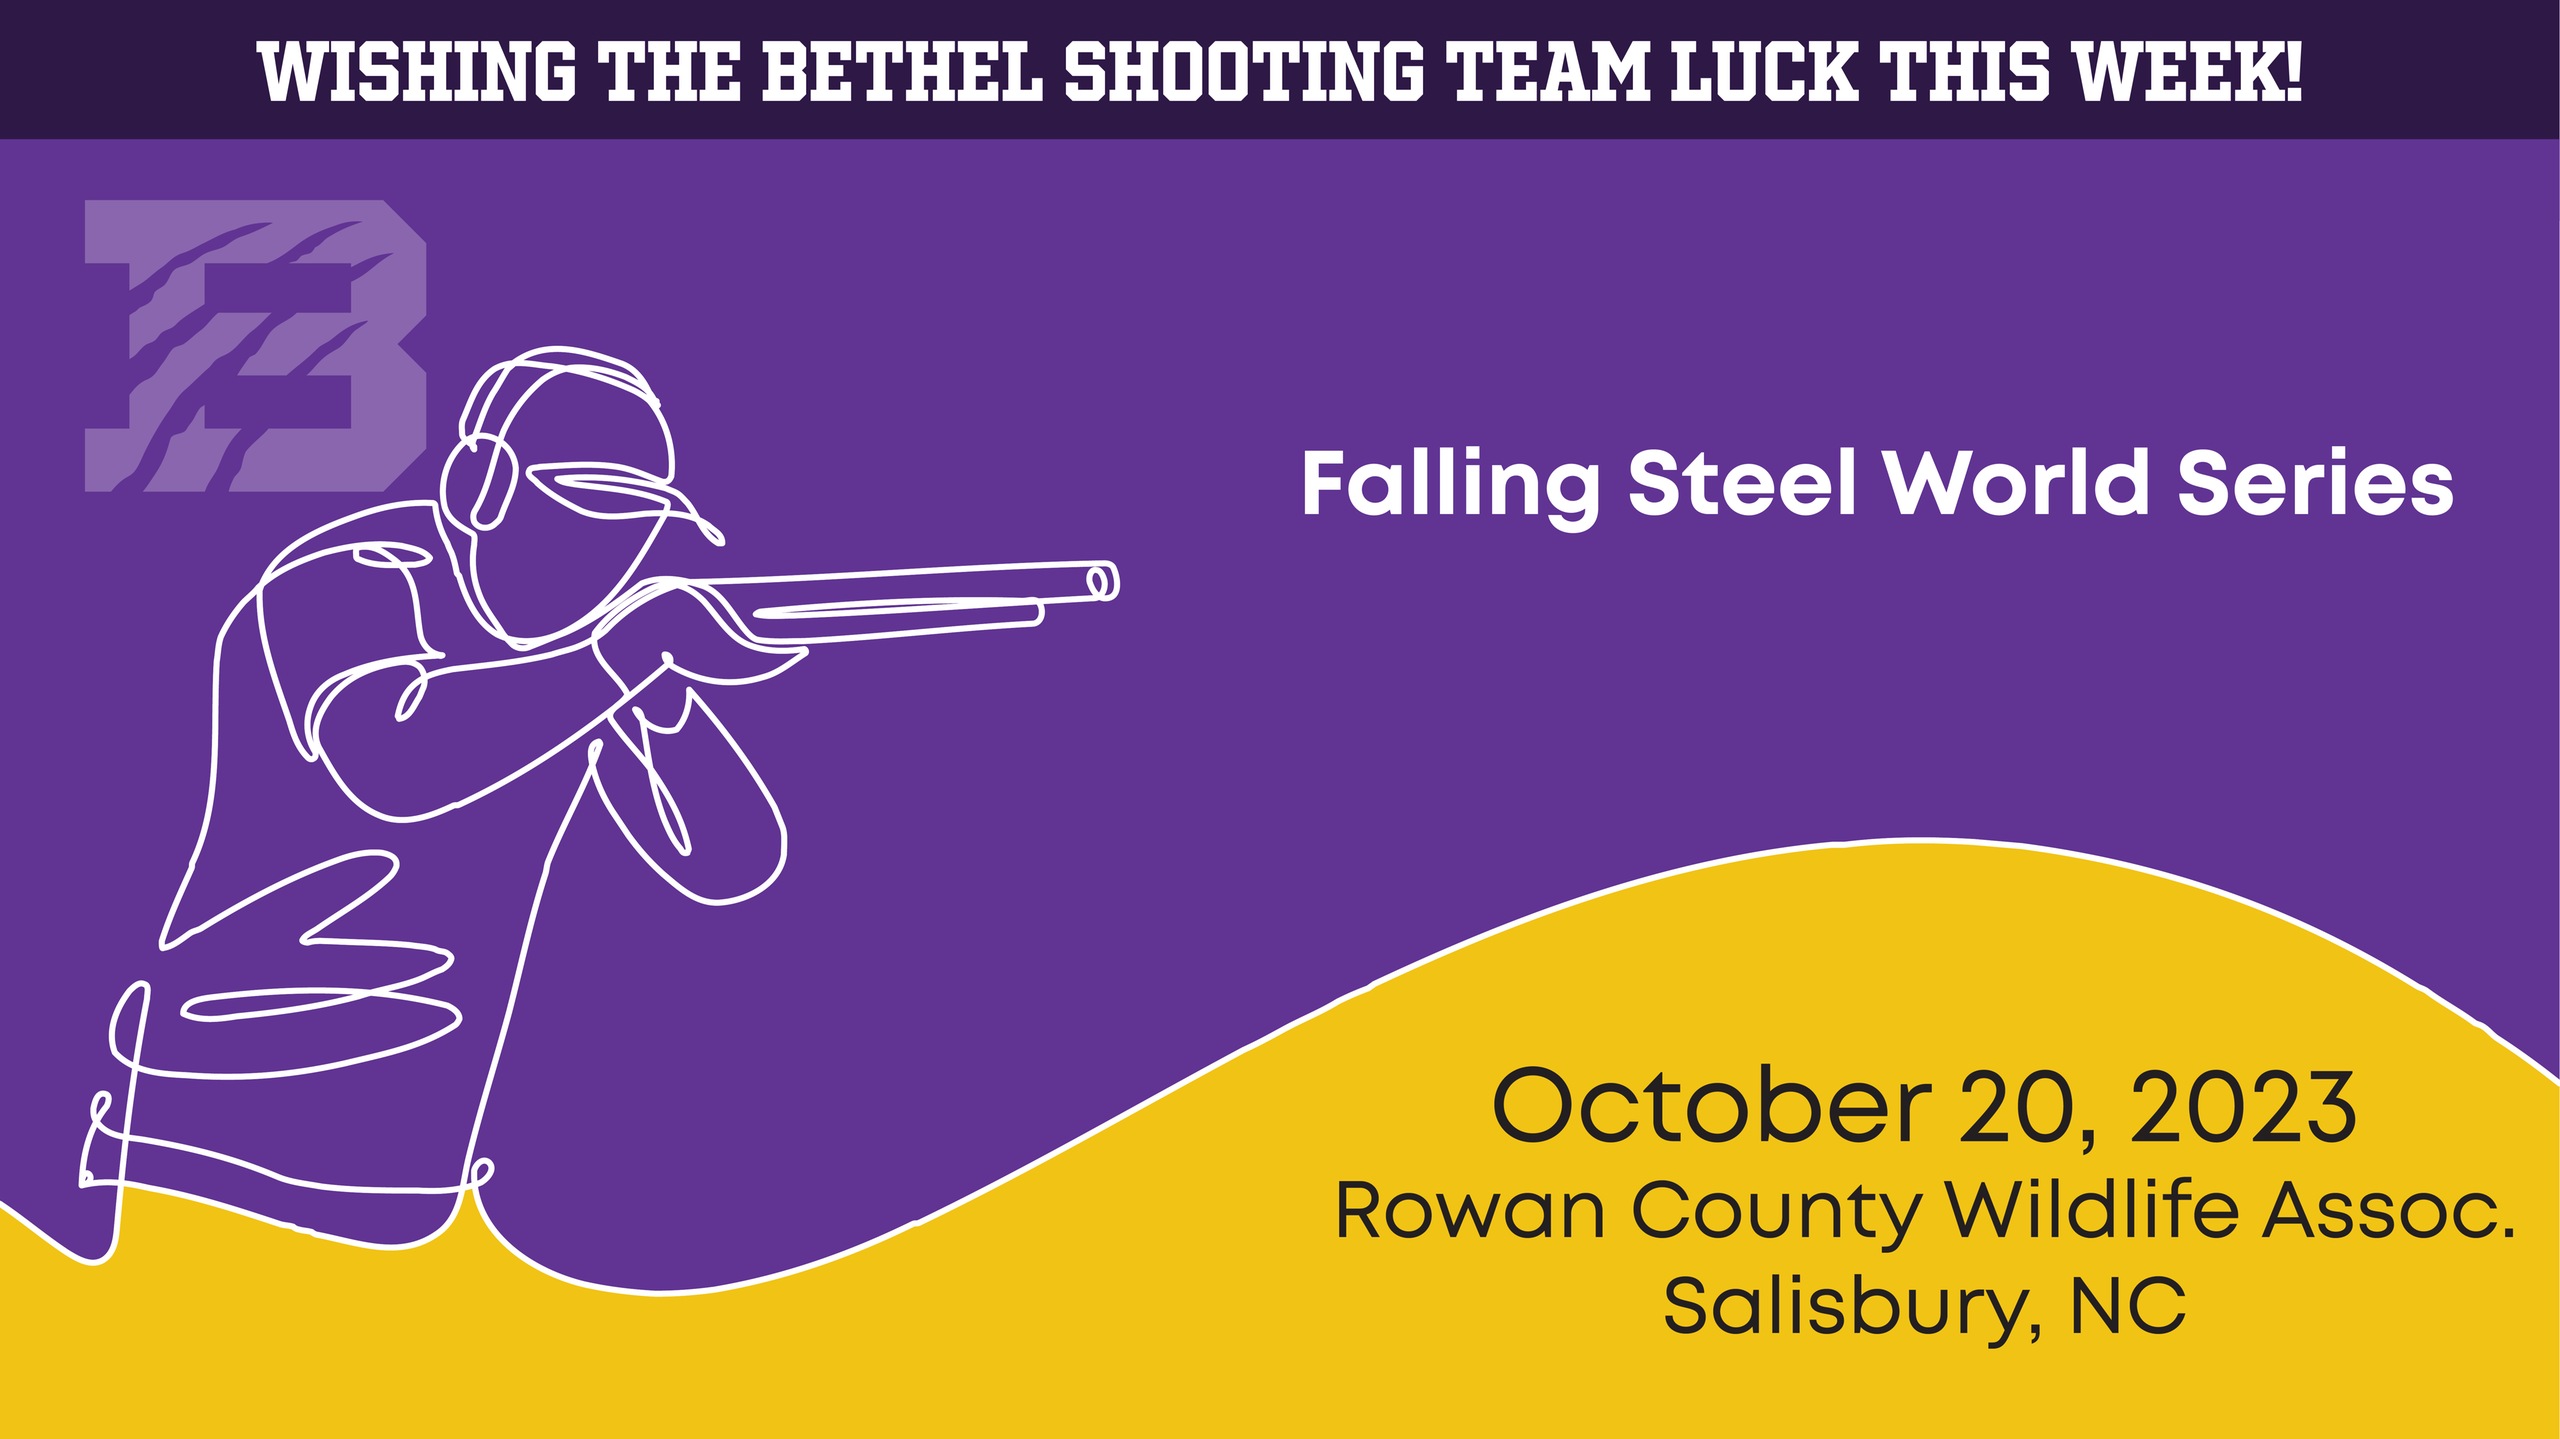 Shooting Cats Head to Falling Steel World Series